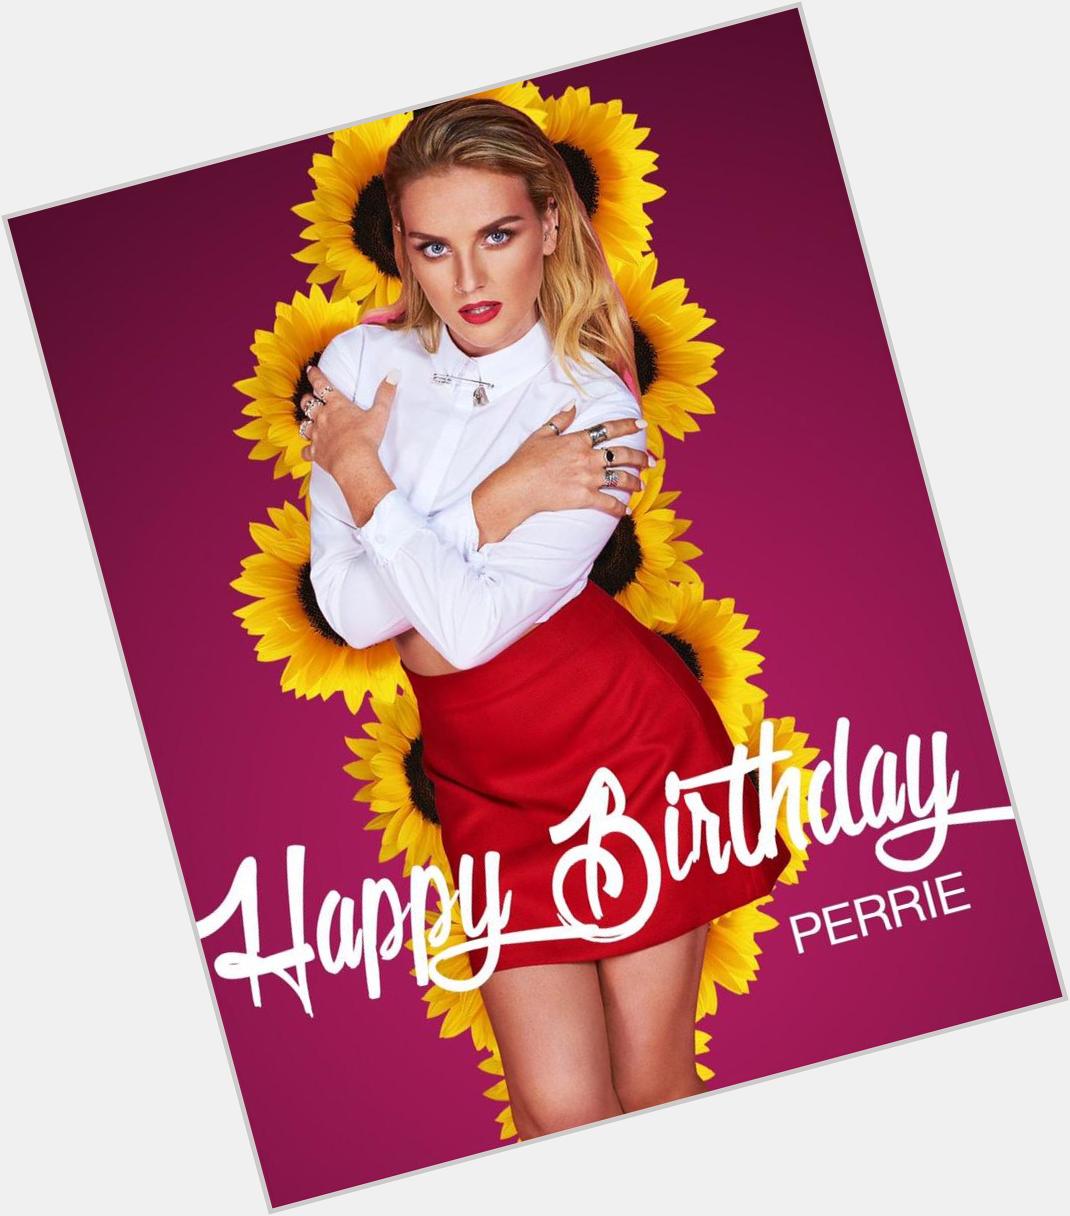 Happy Birthday Perrie Edwards! Hope your having a lovely day   